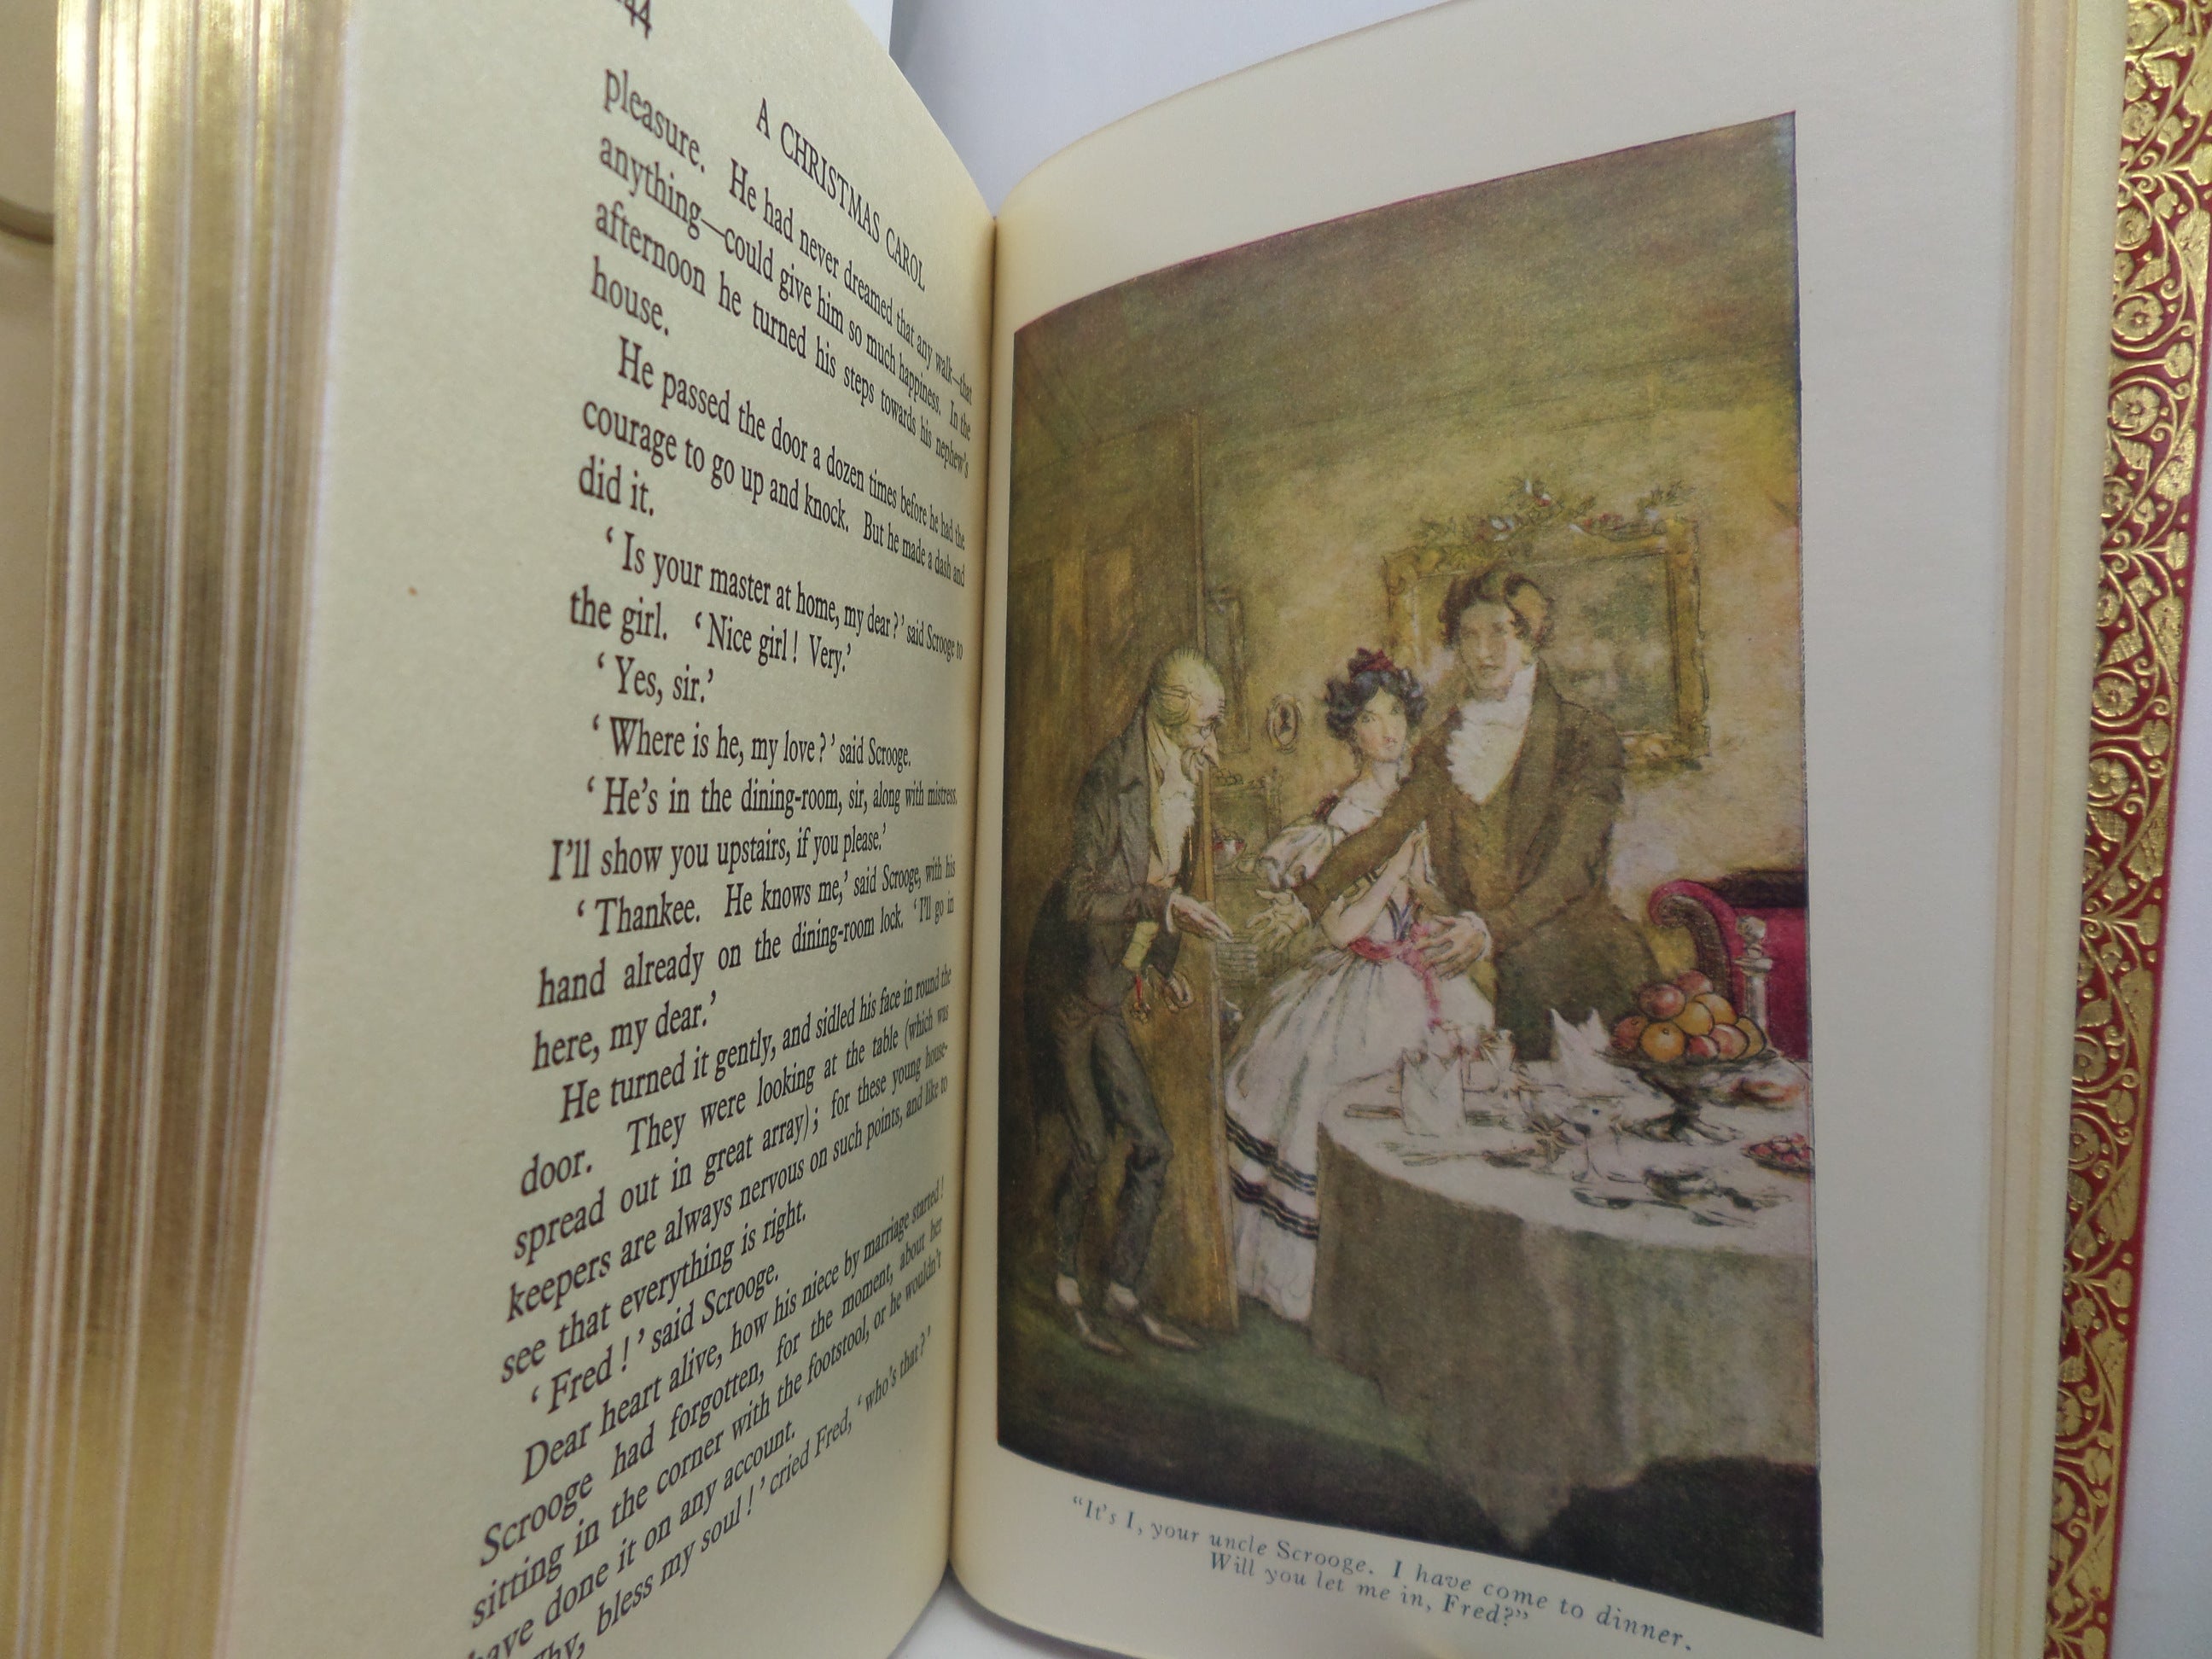 A CHRISTMAS CAROL BY CHARLES DICKENS ILLUSTRATED BY ARTHUR RACKHAM, FINE BINDING